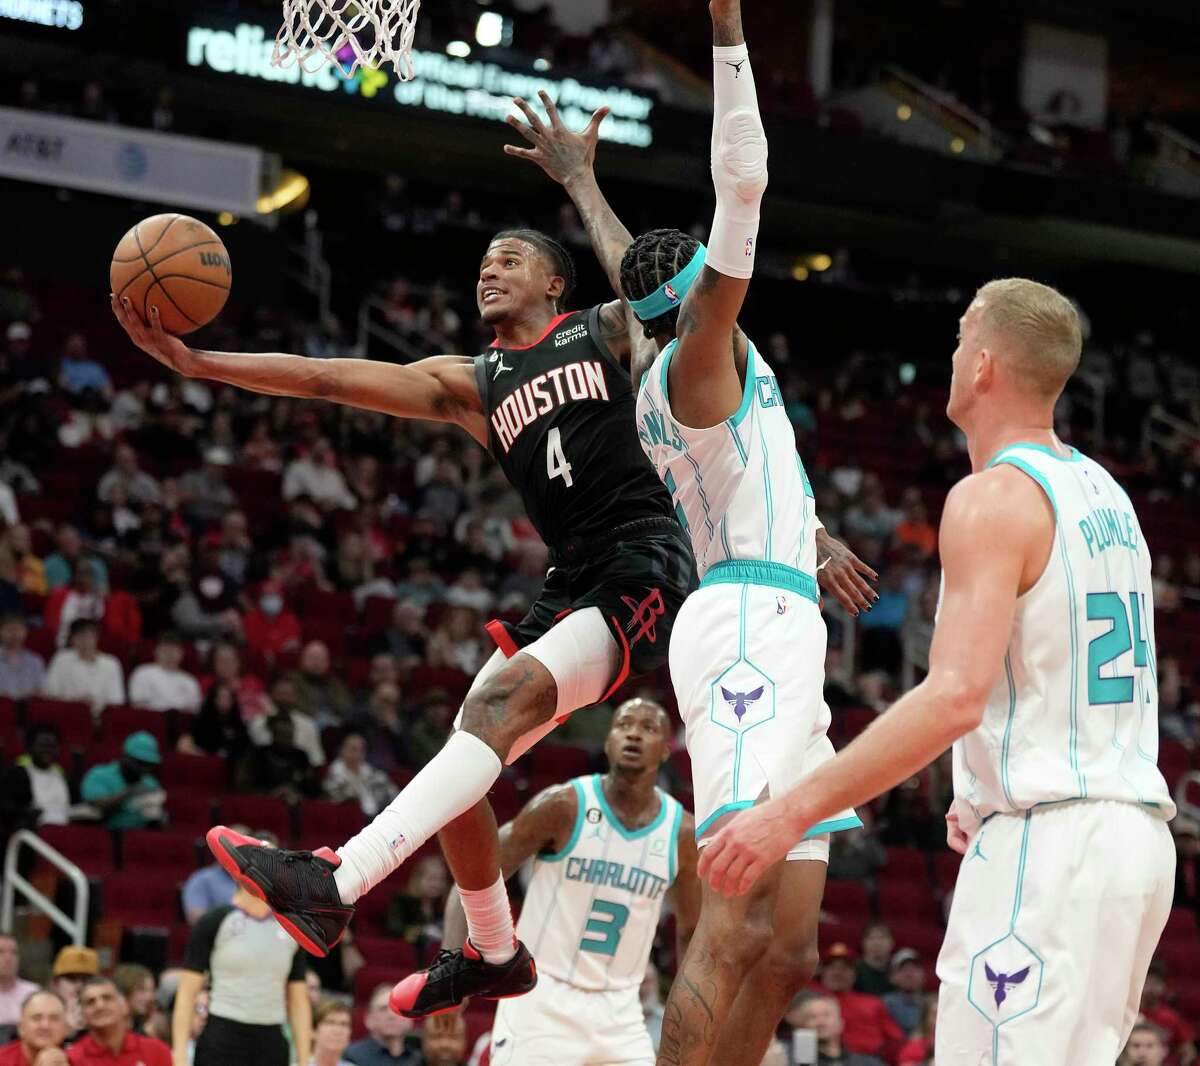 Jalen Green matched his career high with 41 points Wednesday, but it wasn't enough for the Rockets to end their long losing streak, which reached 12 games after the loss to the Hornets.